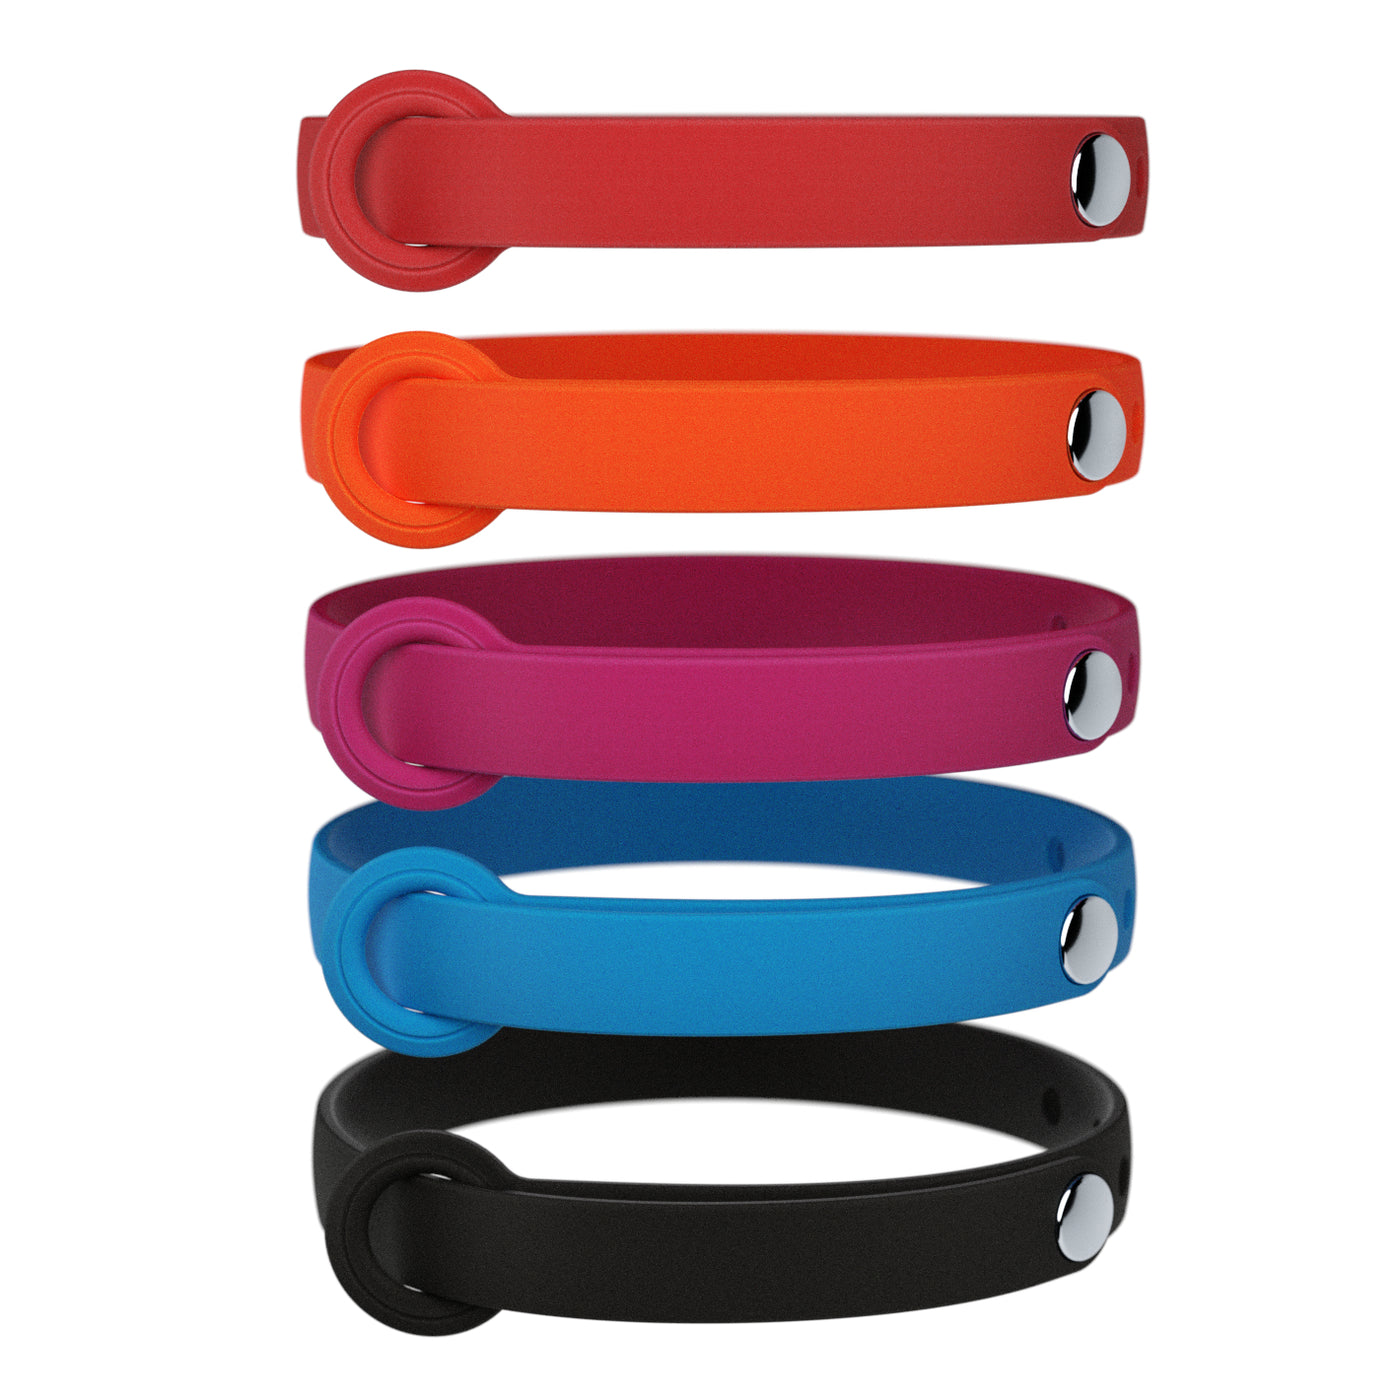 NUVUQ - Comfortable Cat Collar - Pack of 5 (Pink, Blue, Black, Red and Orange)